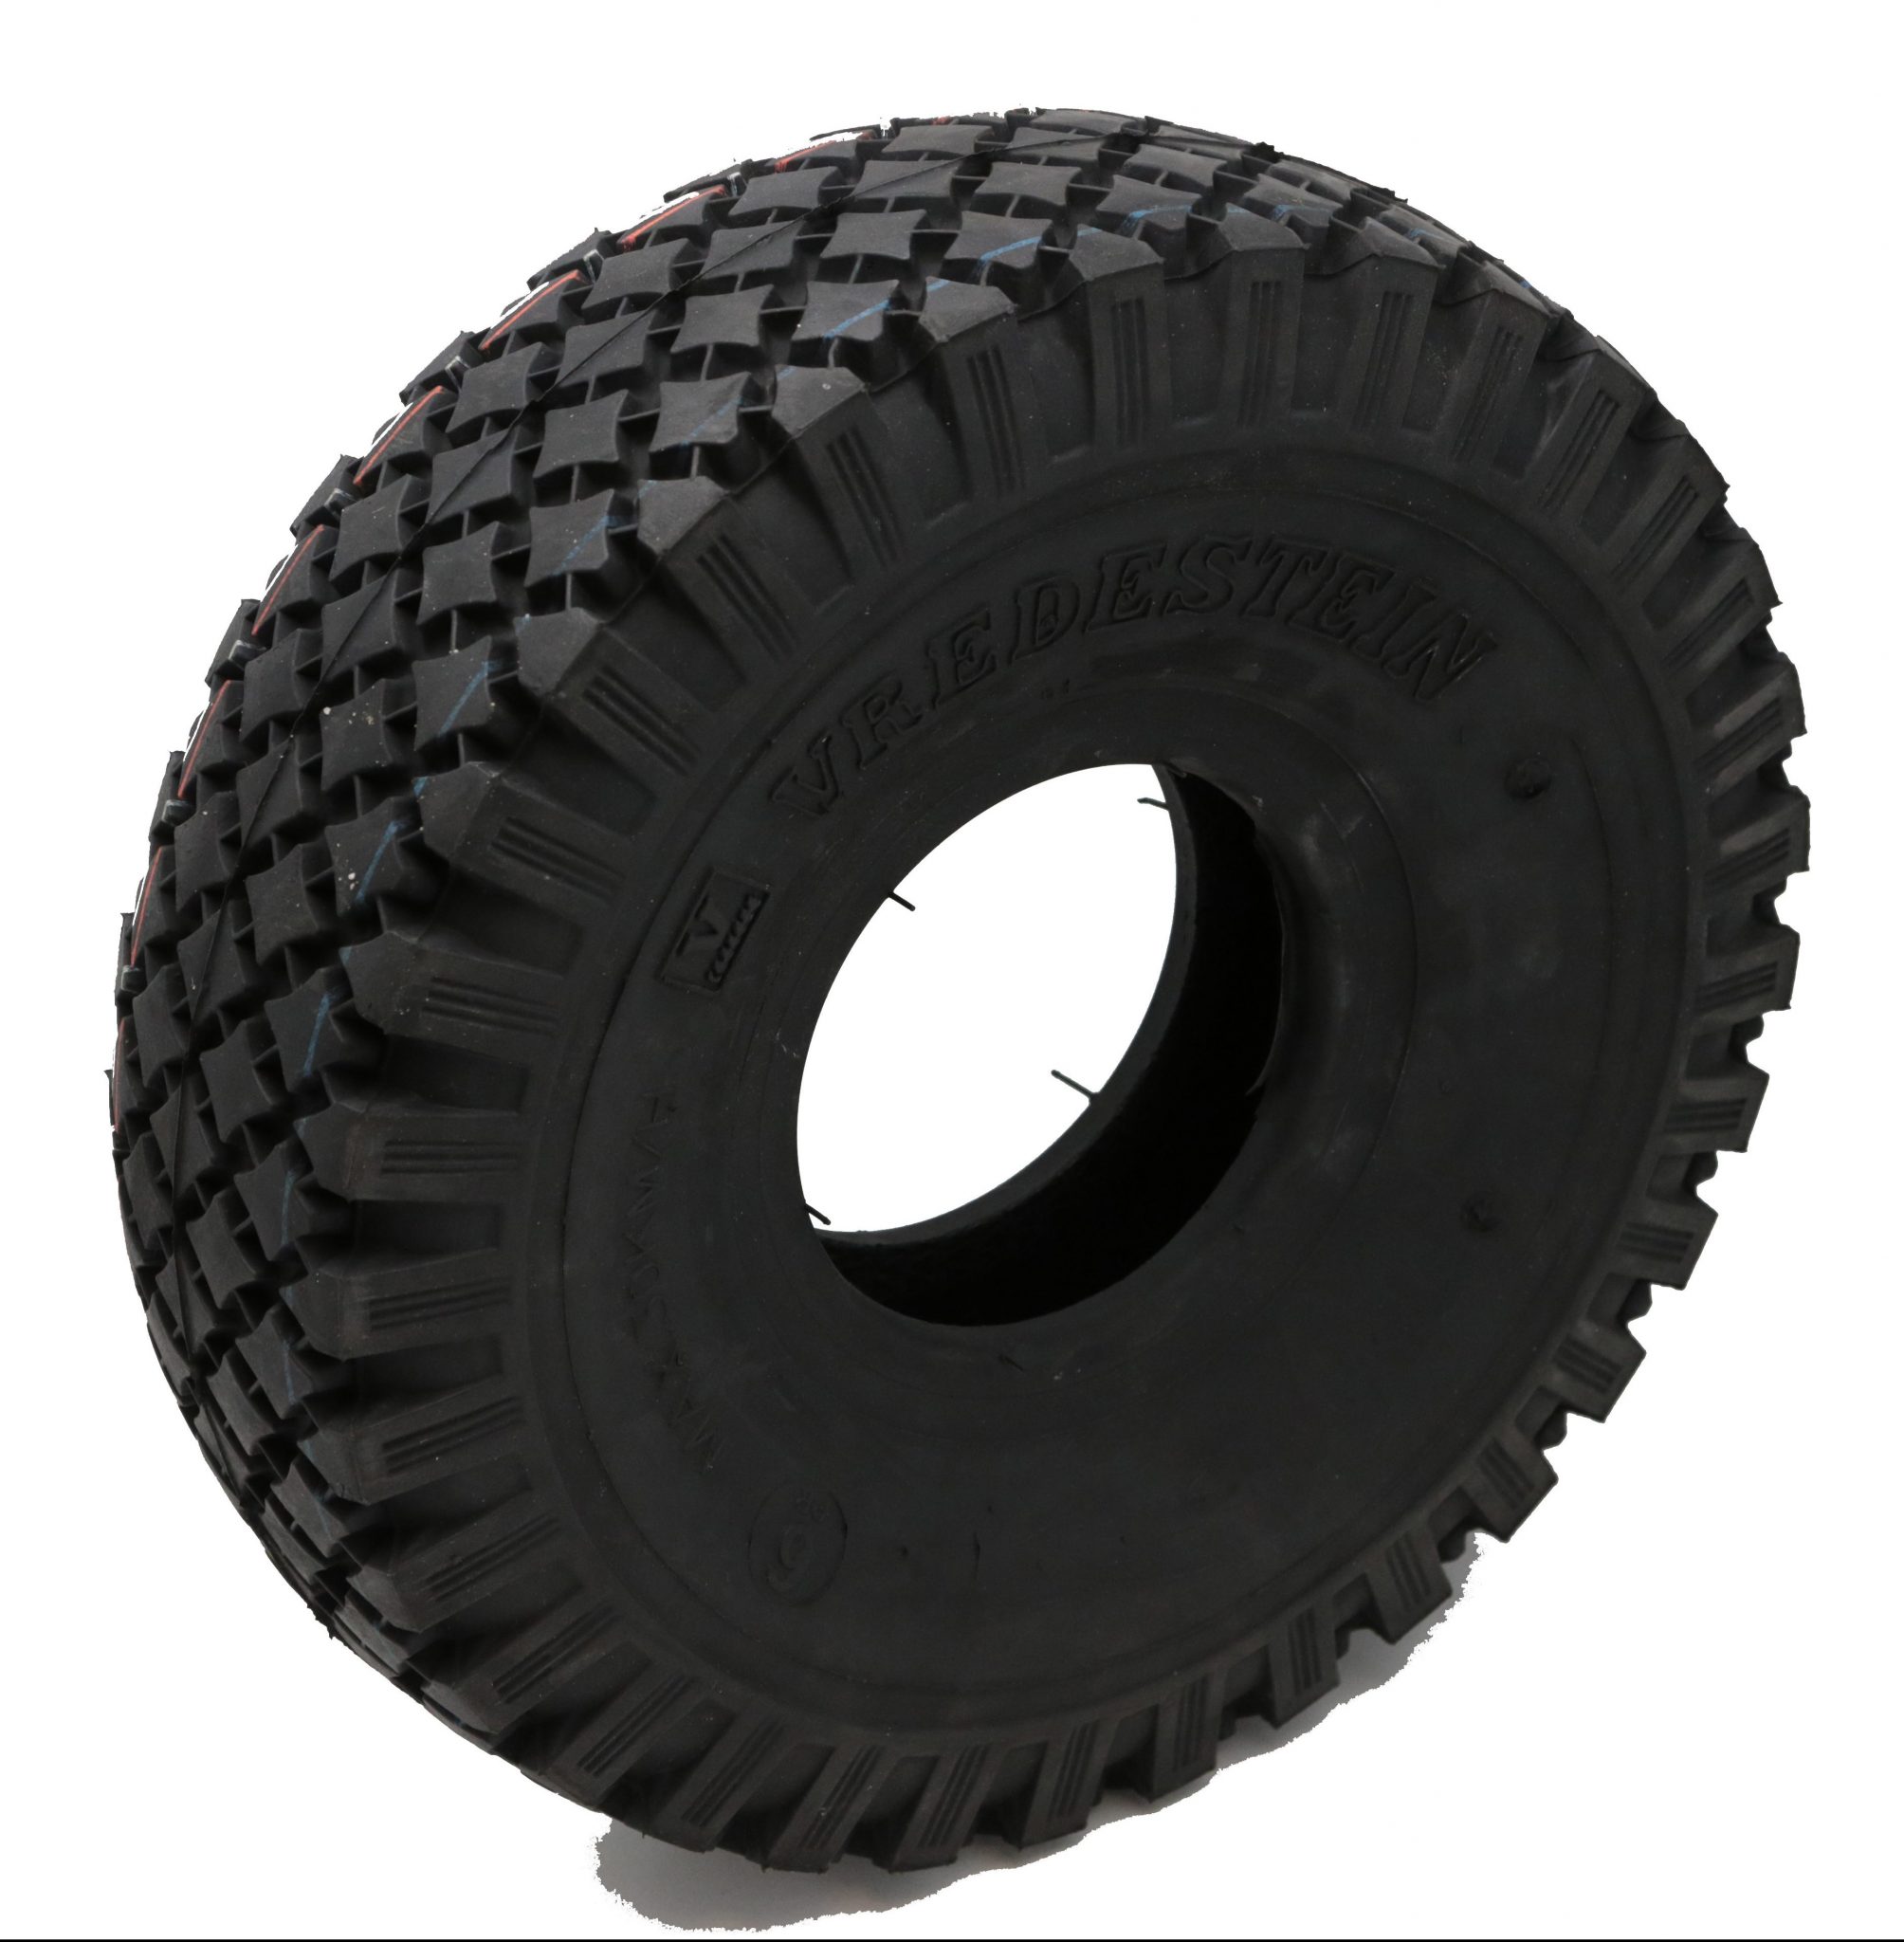 new tires for sewer equipment by TruGrit Traction